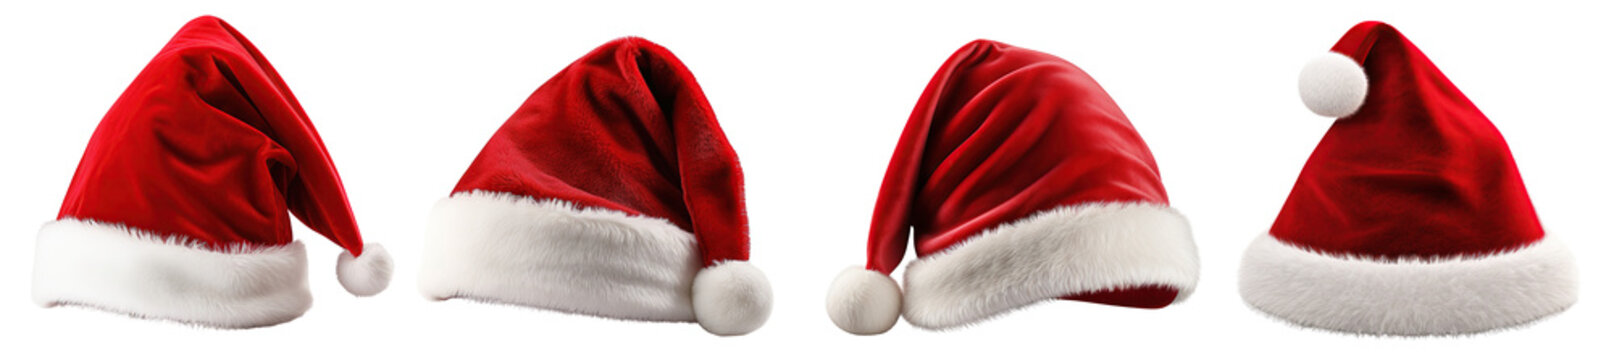 Collection of red santa hats isolated on white background